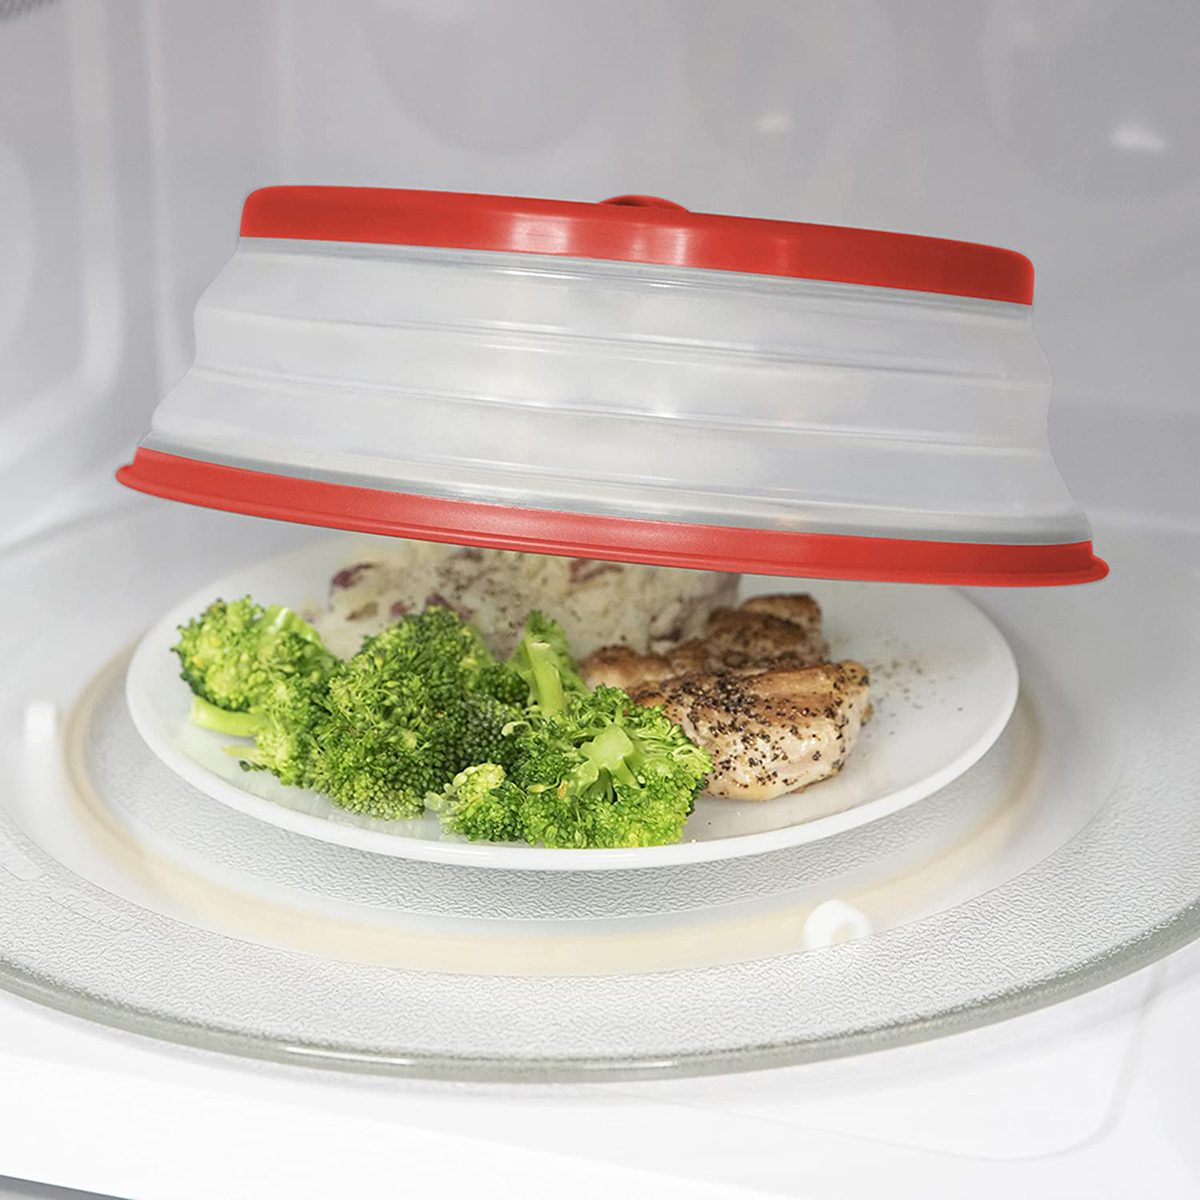 https://www.tasteofhome.com/wp-content/uploads/2019/05/collapsible-microwave-steamer-cover-via-amazon.com-ecomm.jpg?fit=700%2C700